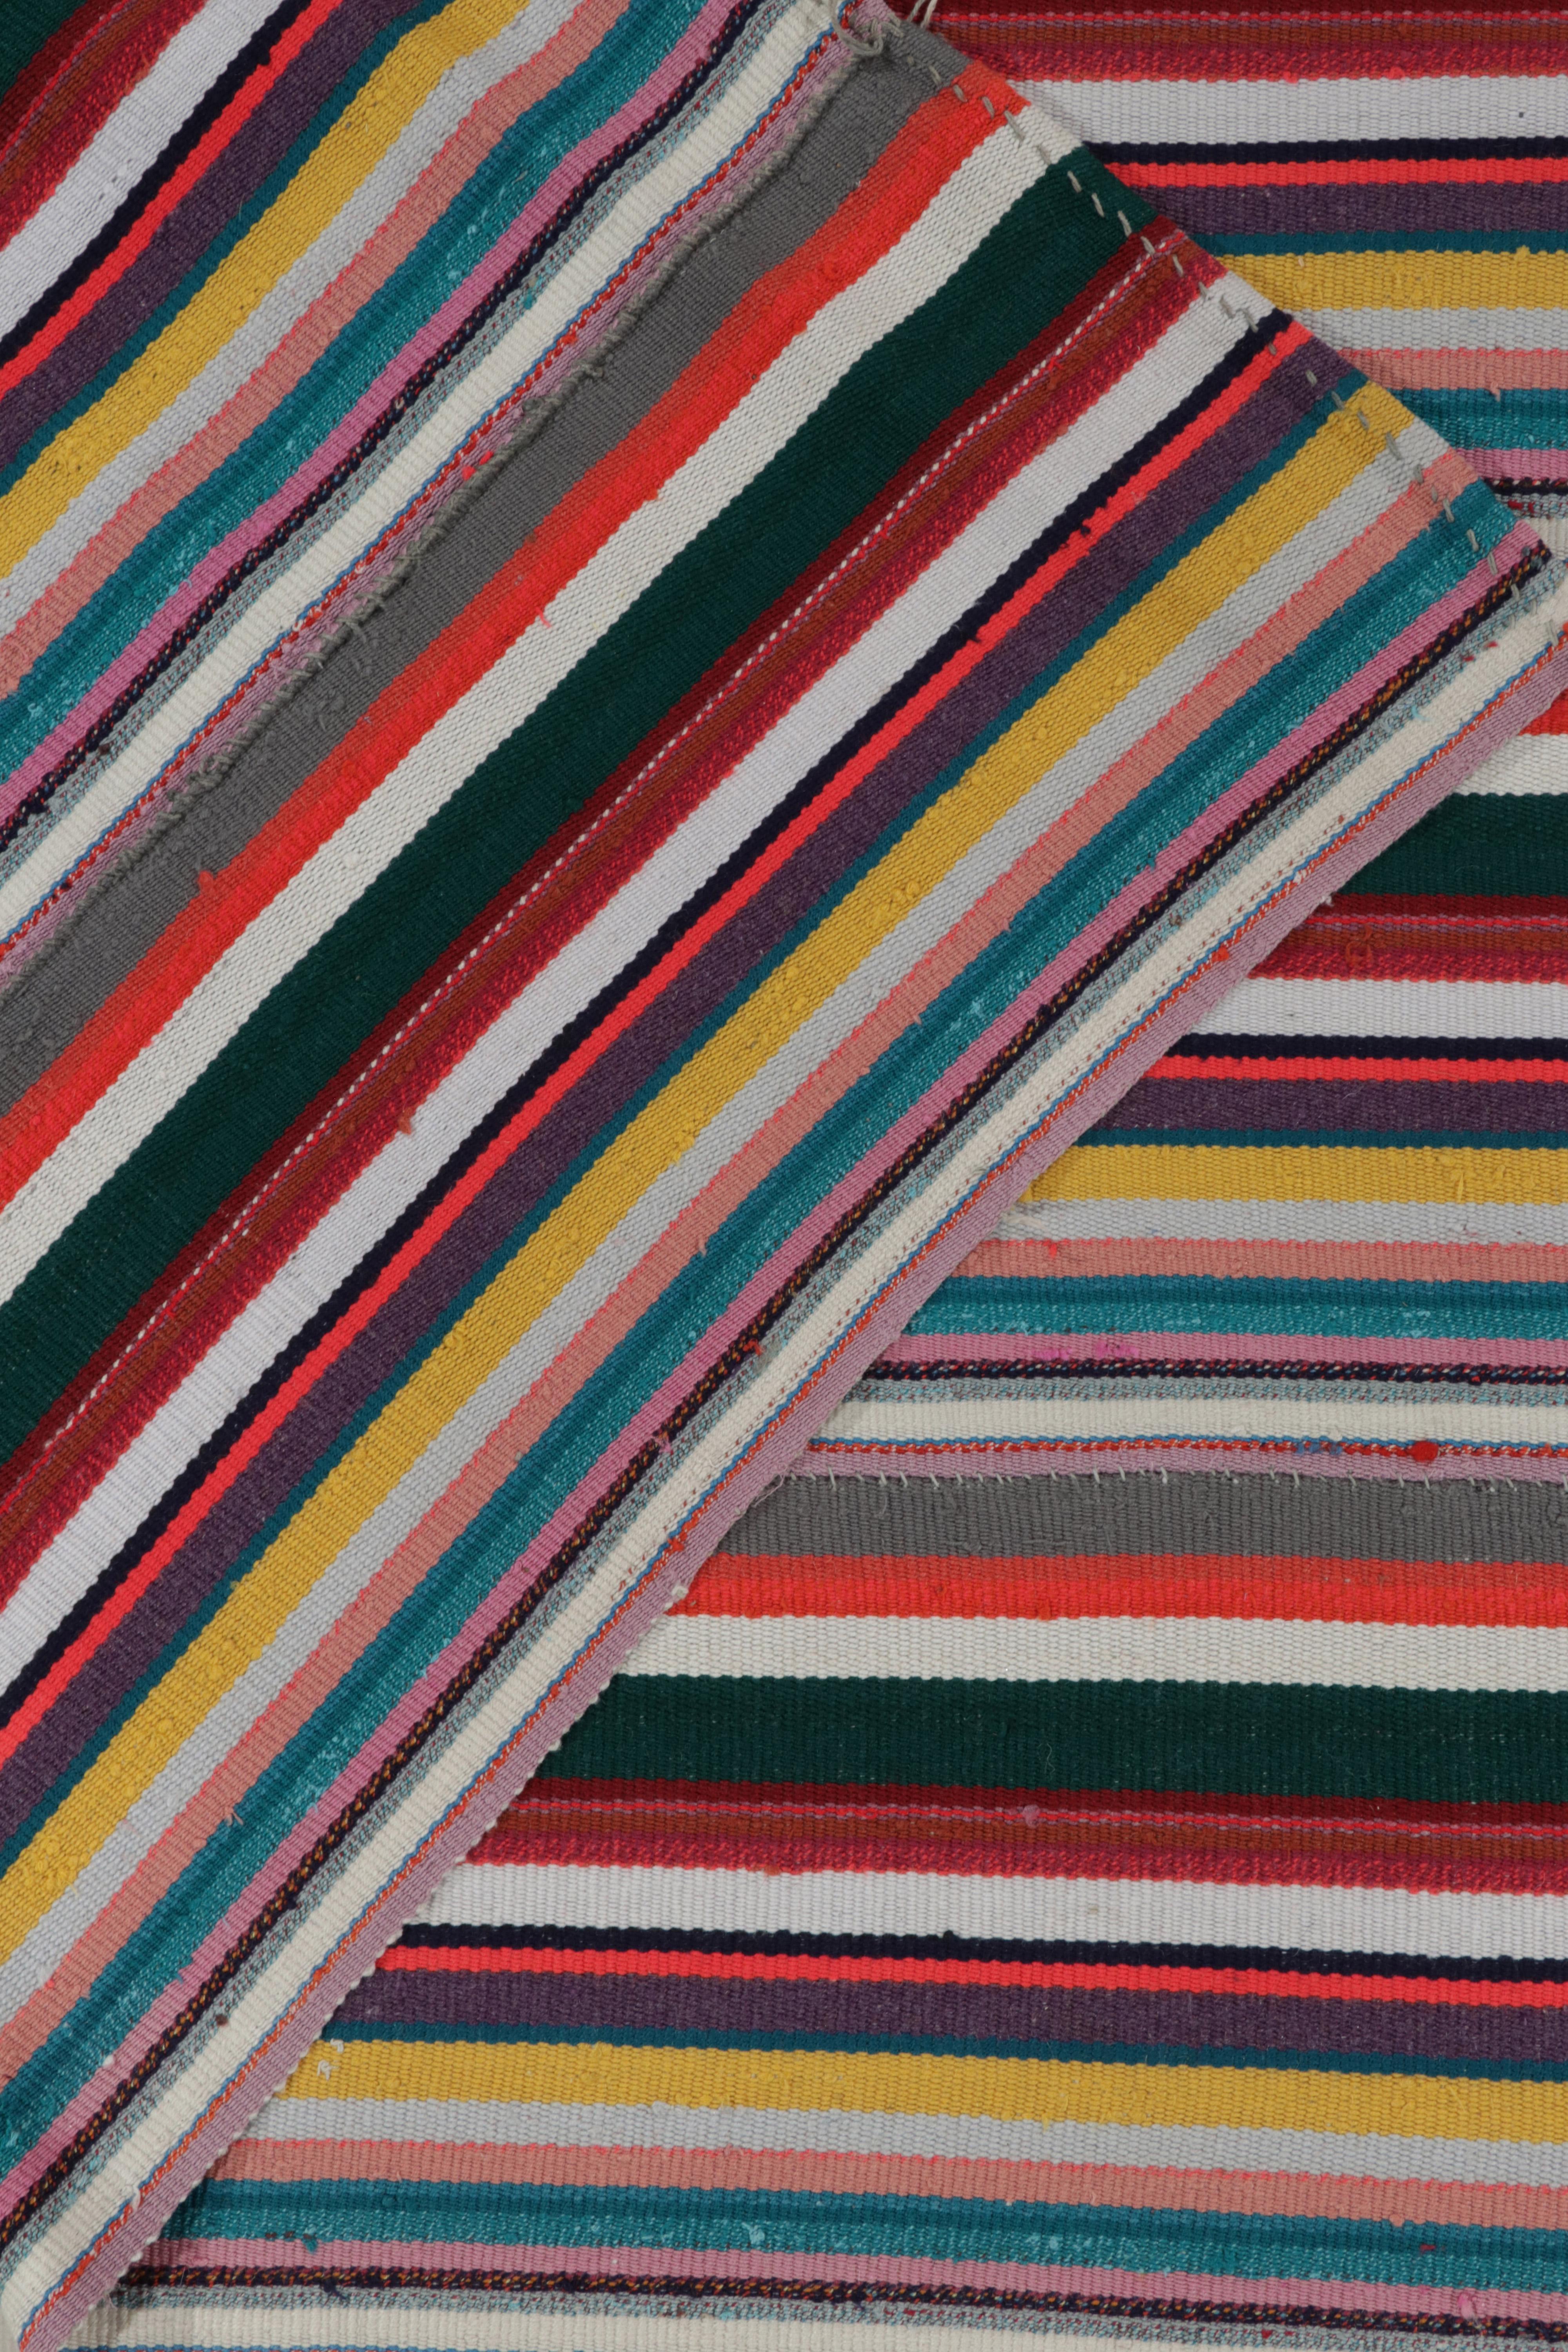 1950s Vintage Chaput Kilim Rug in Multicolor Stripe Patterns, by Rug & Kilim In Good Condition For Sale In Long Island City, NY